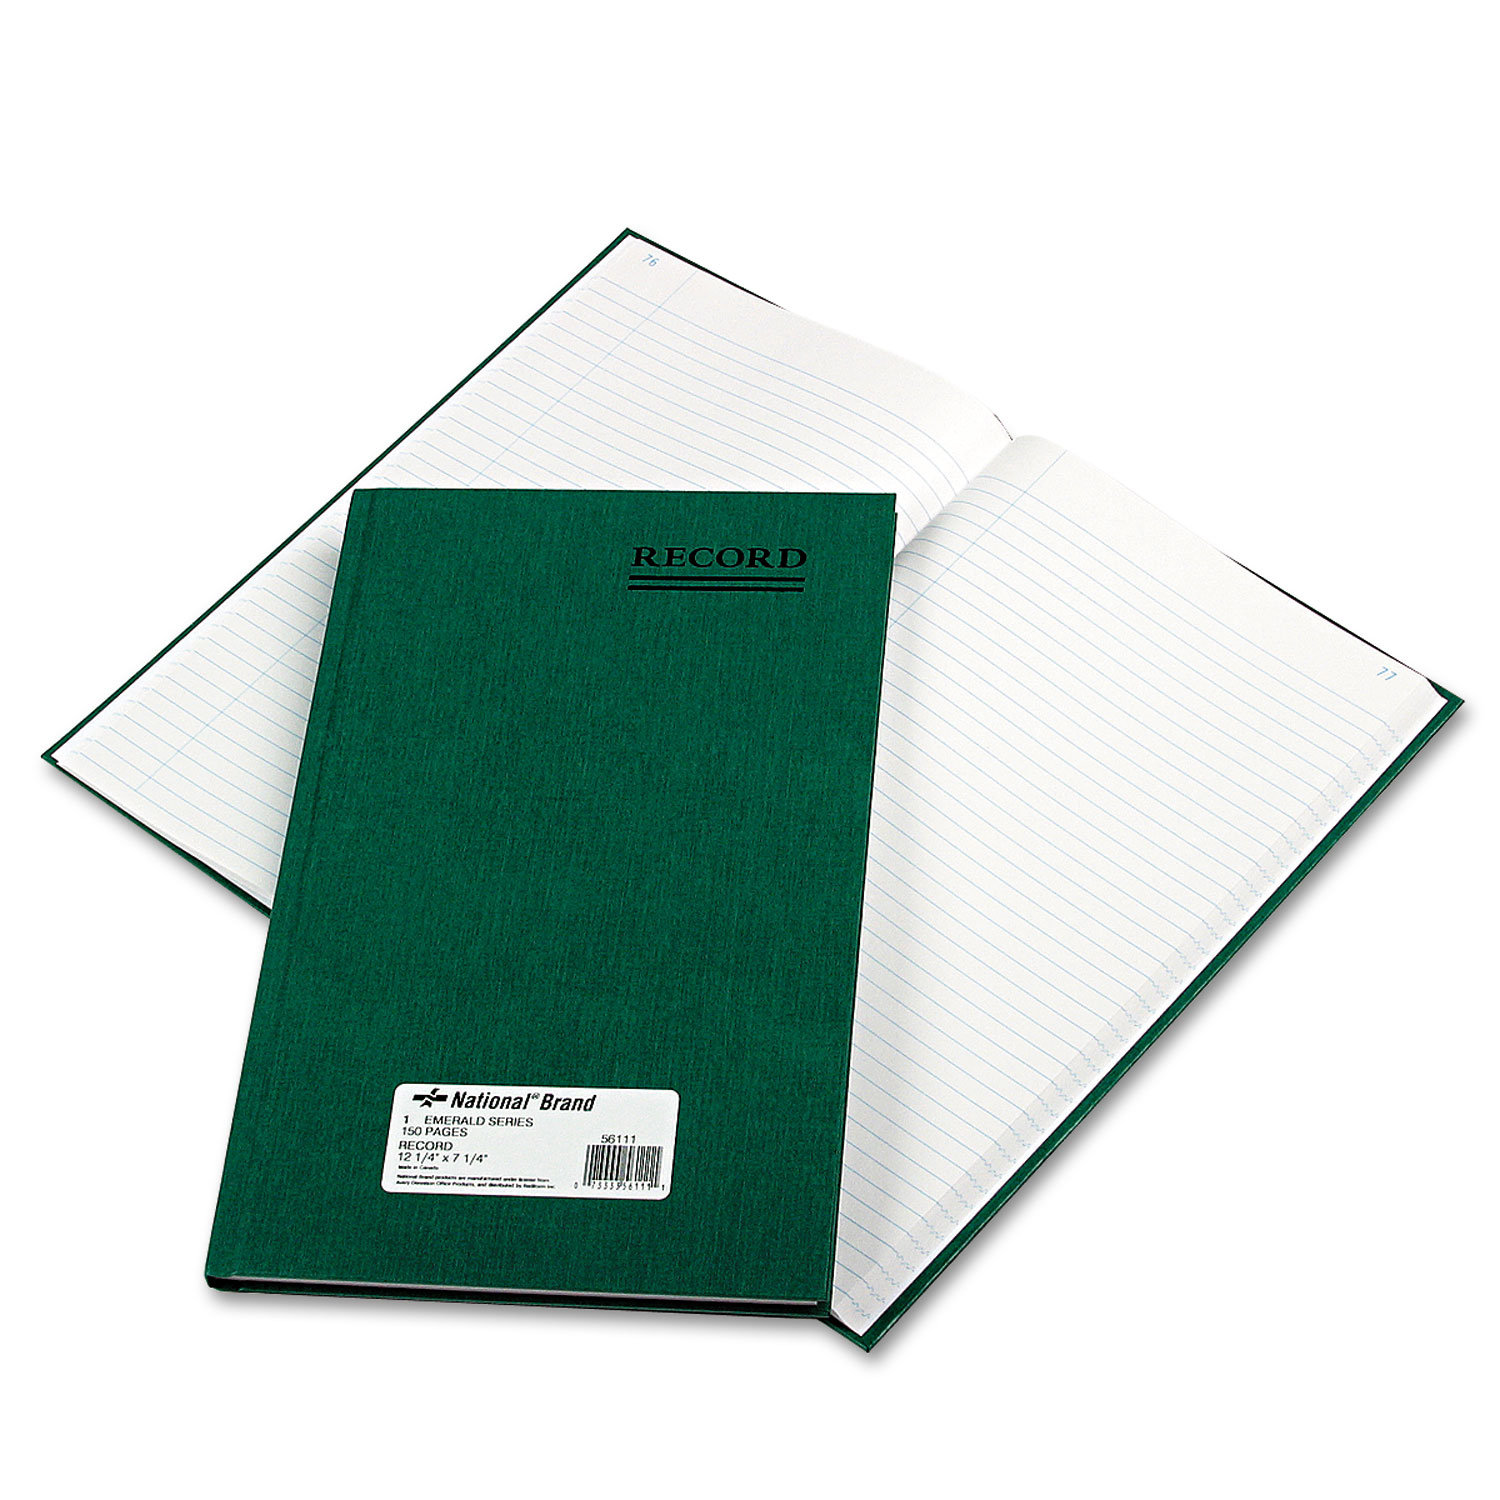 Emerald Series Account Book, Green Cover, 150 Pages, 12 1/4 x 7 1/4